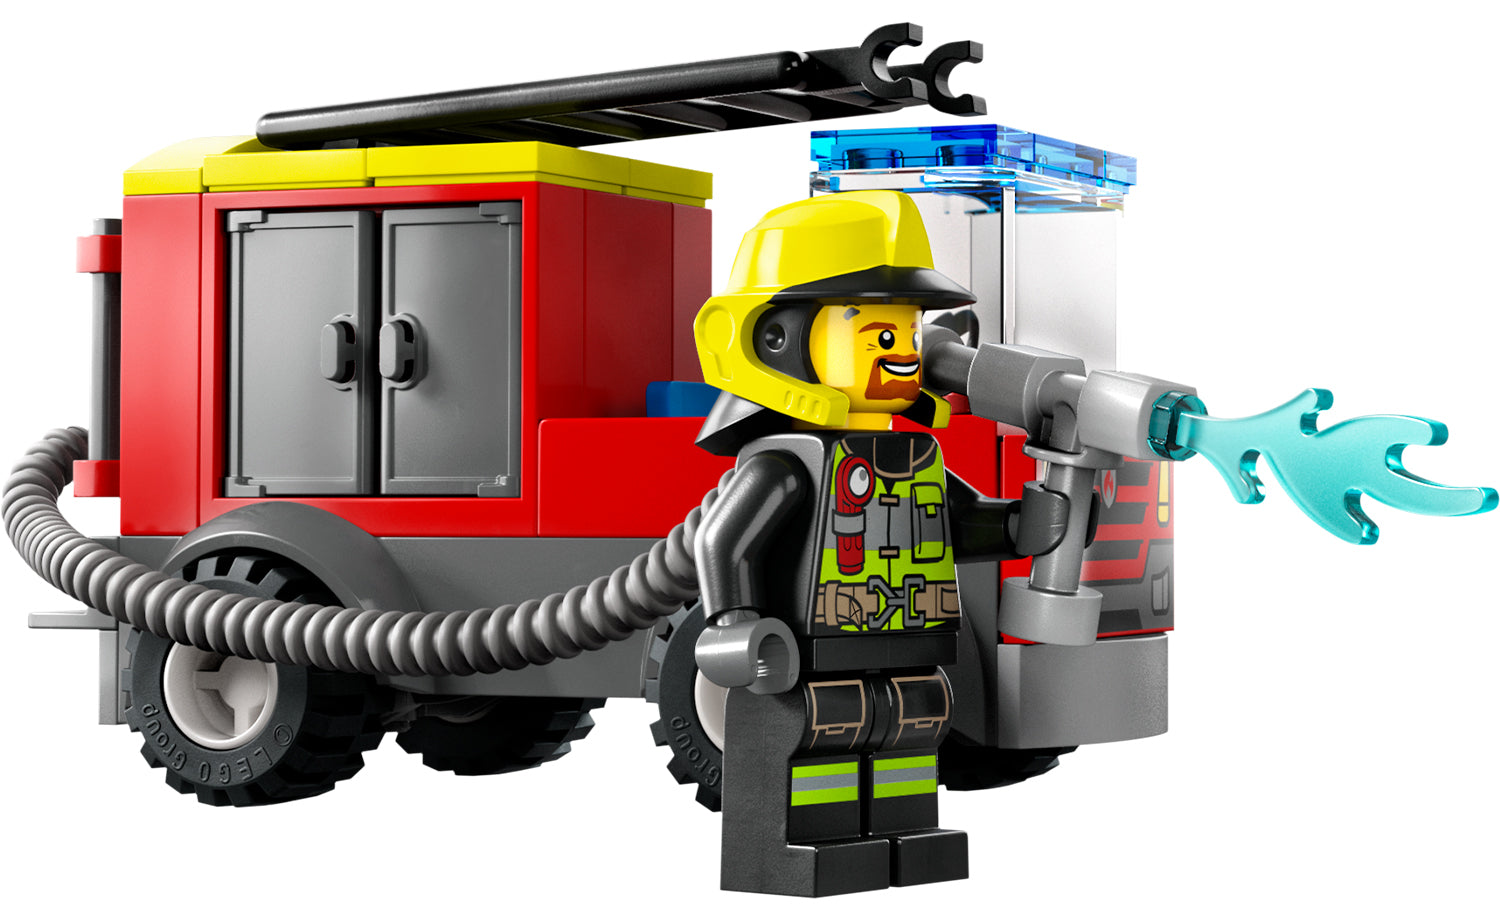 LEGO City Fire Station and Fire Engine 60375, Pretend Play Fire